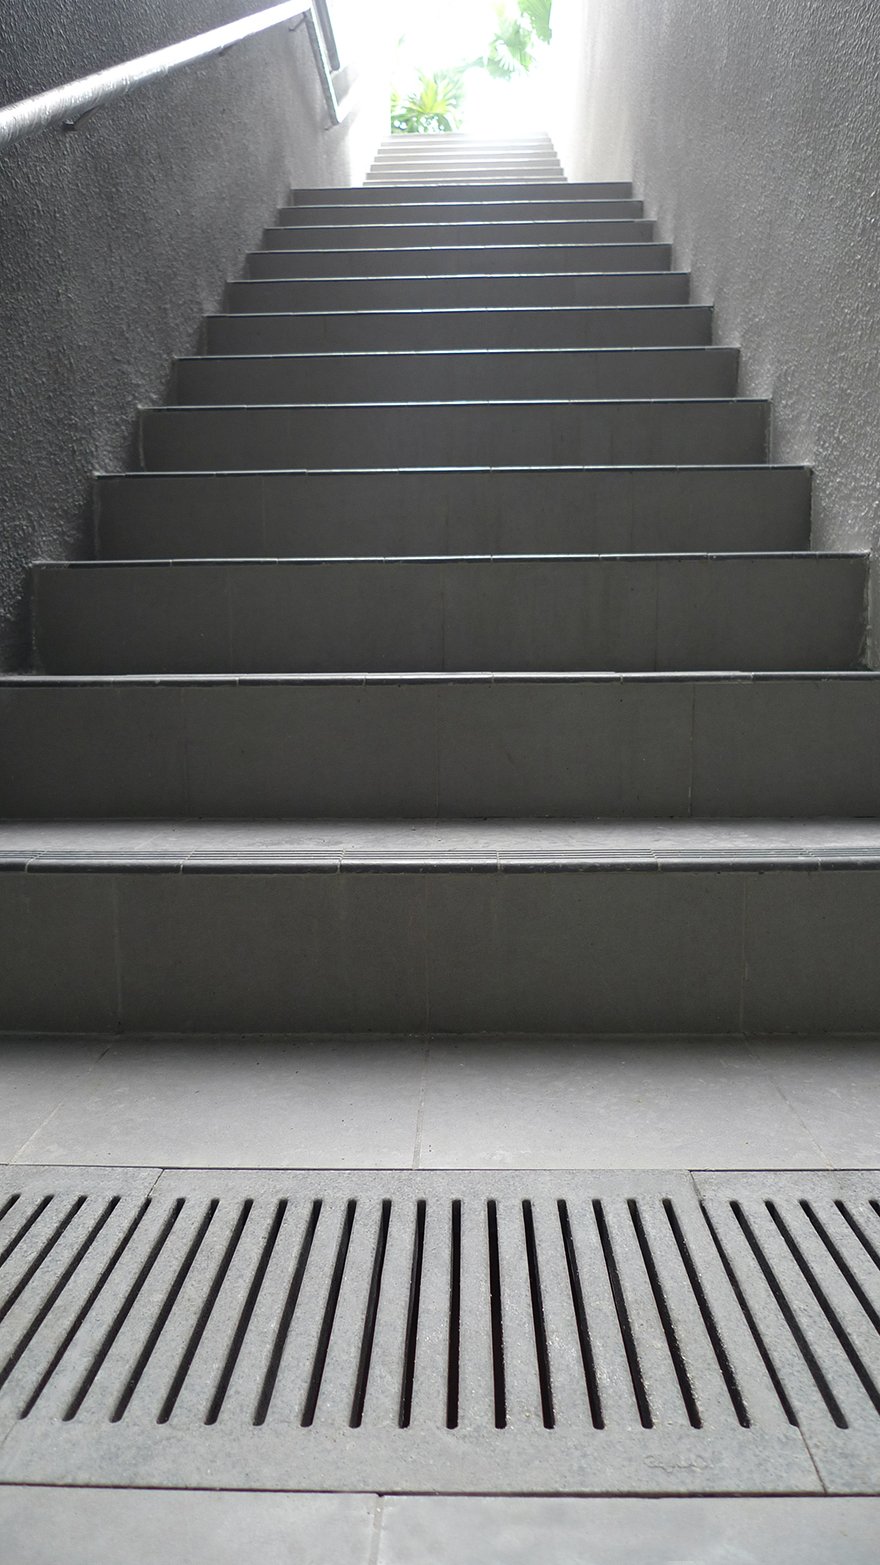 Reinforced stone grates matching tiles in stairwell